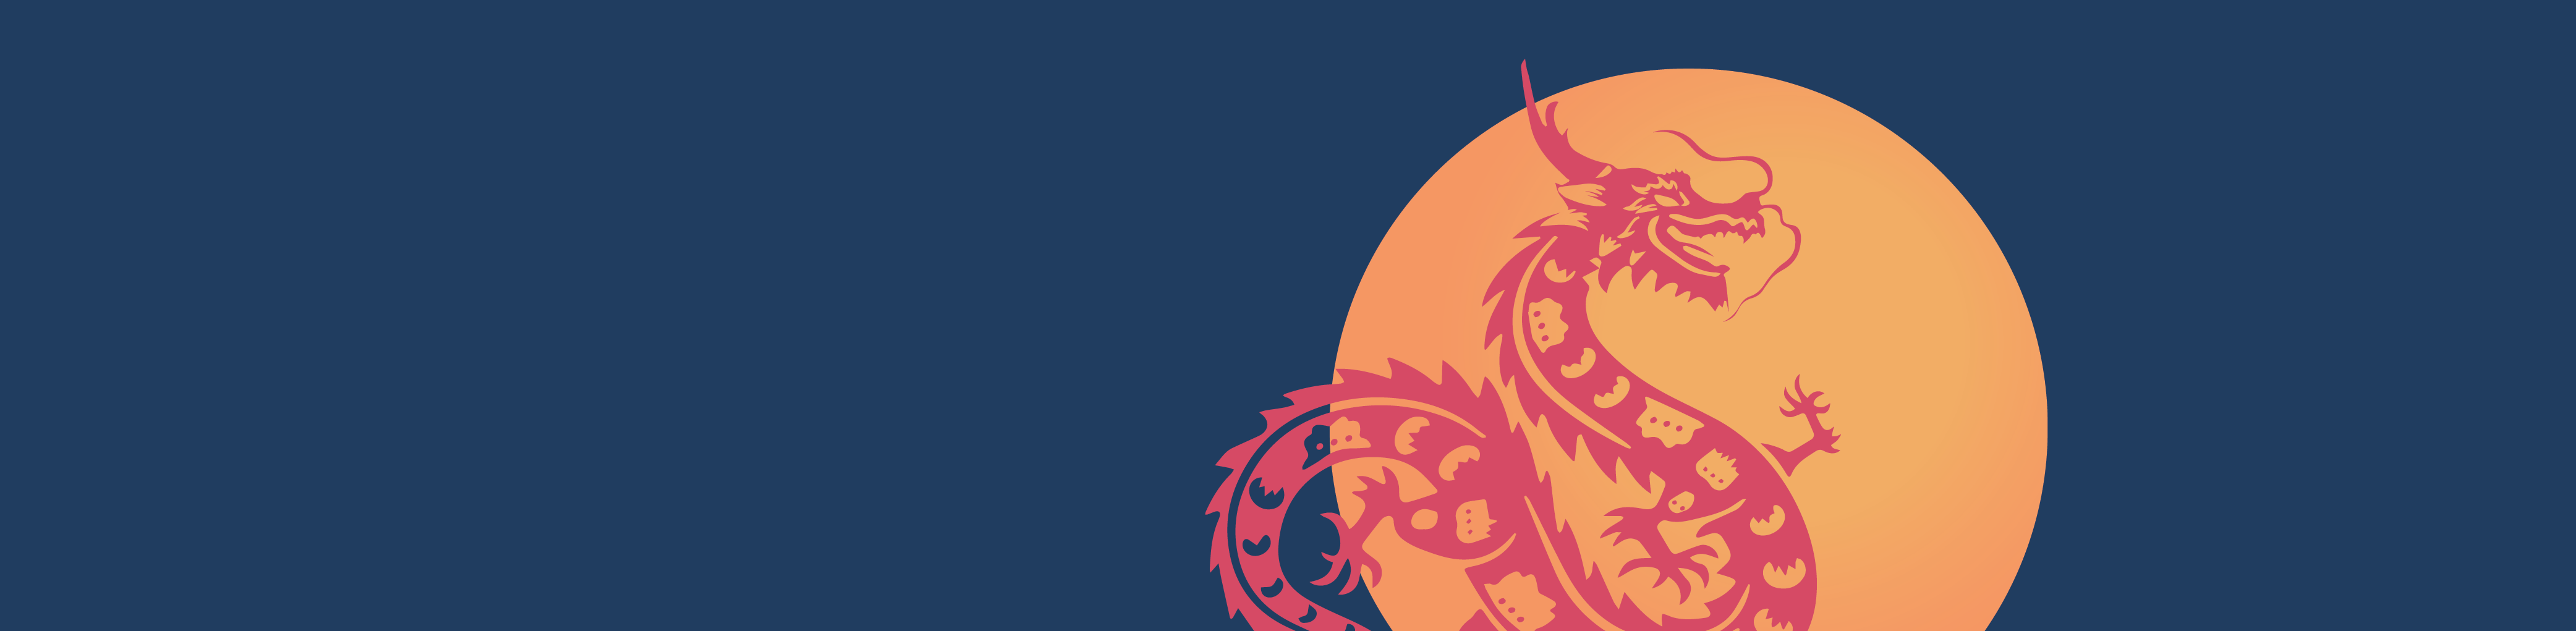 illustration of a red dragon in front of an orange moon against a blue background